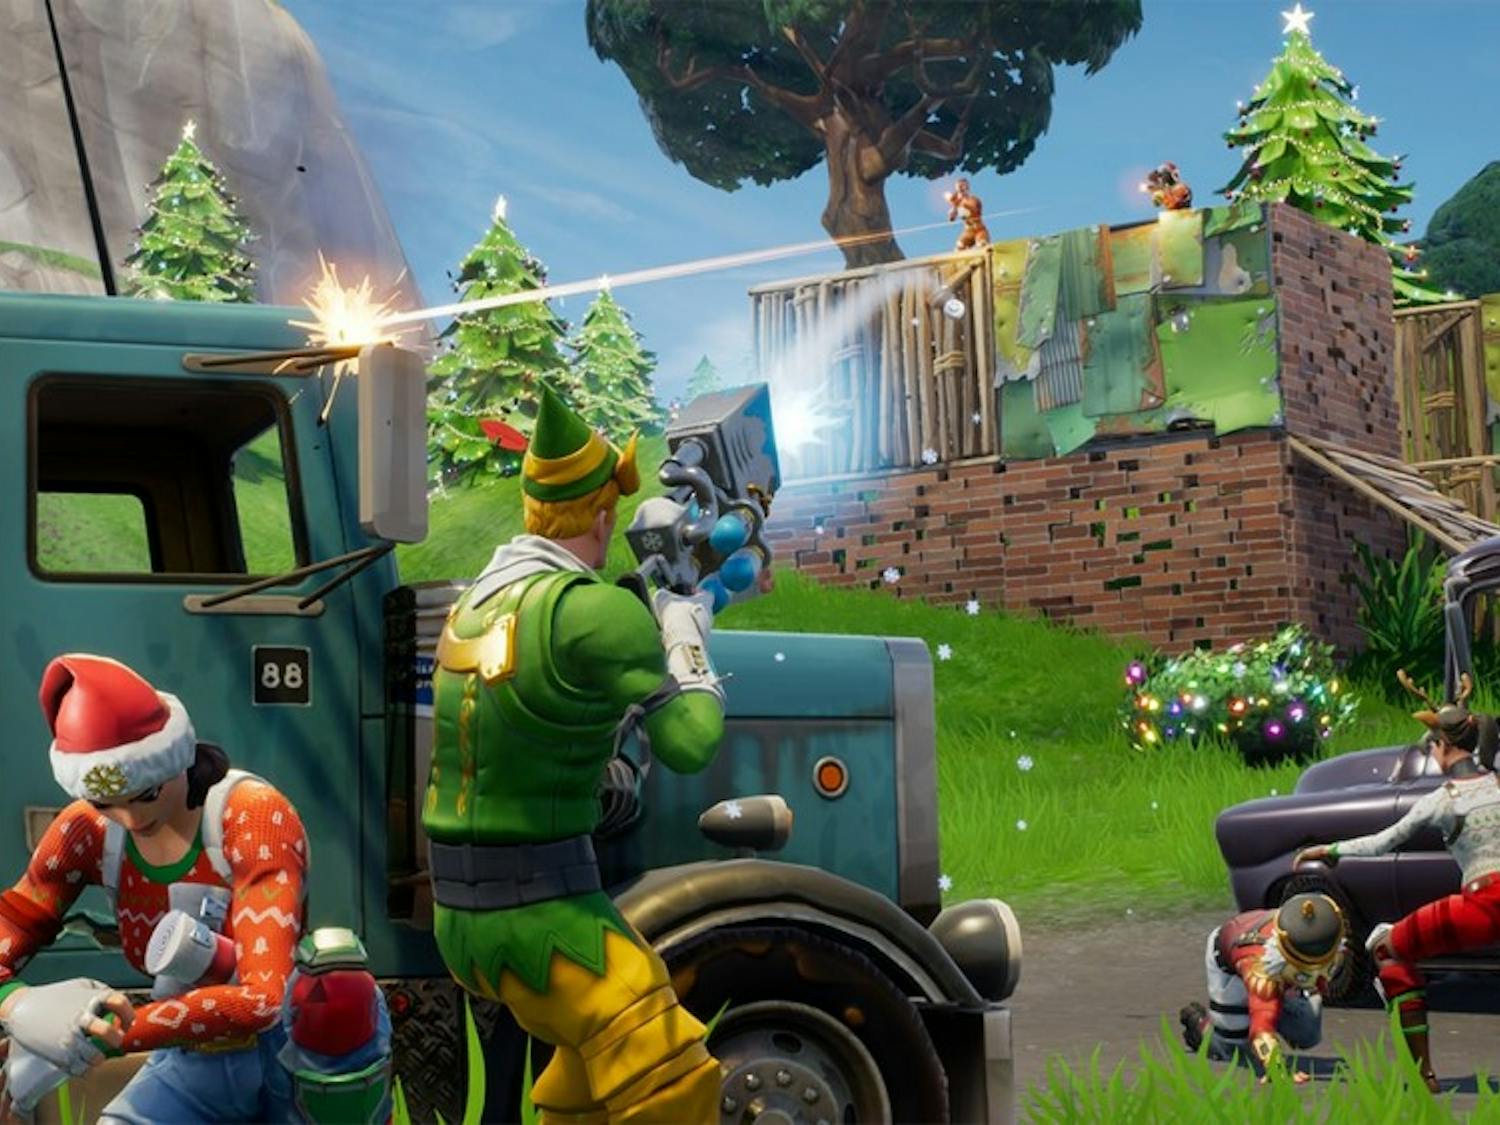 With the release of incredibly popular games like “Fortnite," it’s clearer than ever that the appeal of online multiplayer games is real.